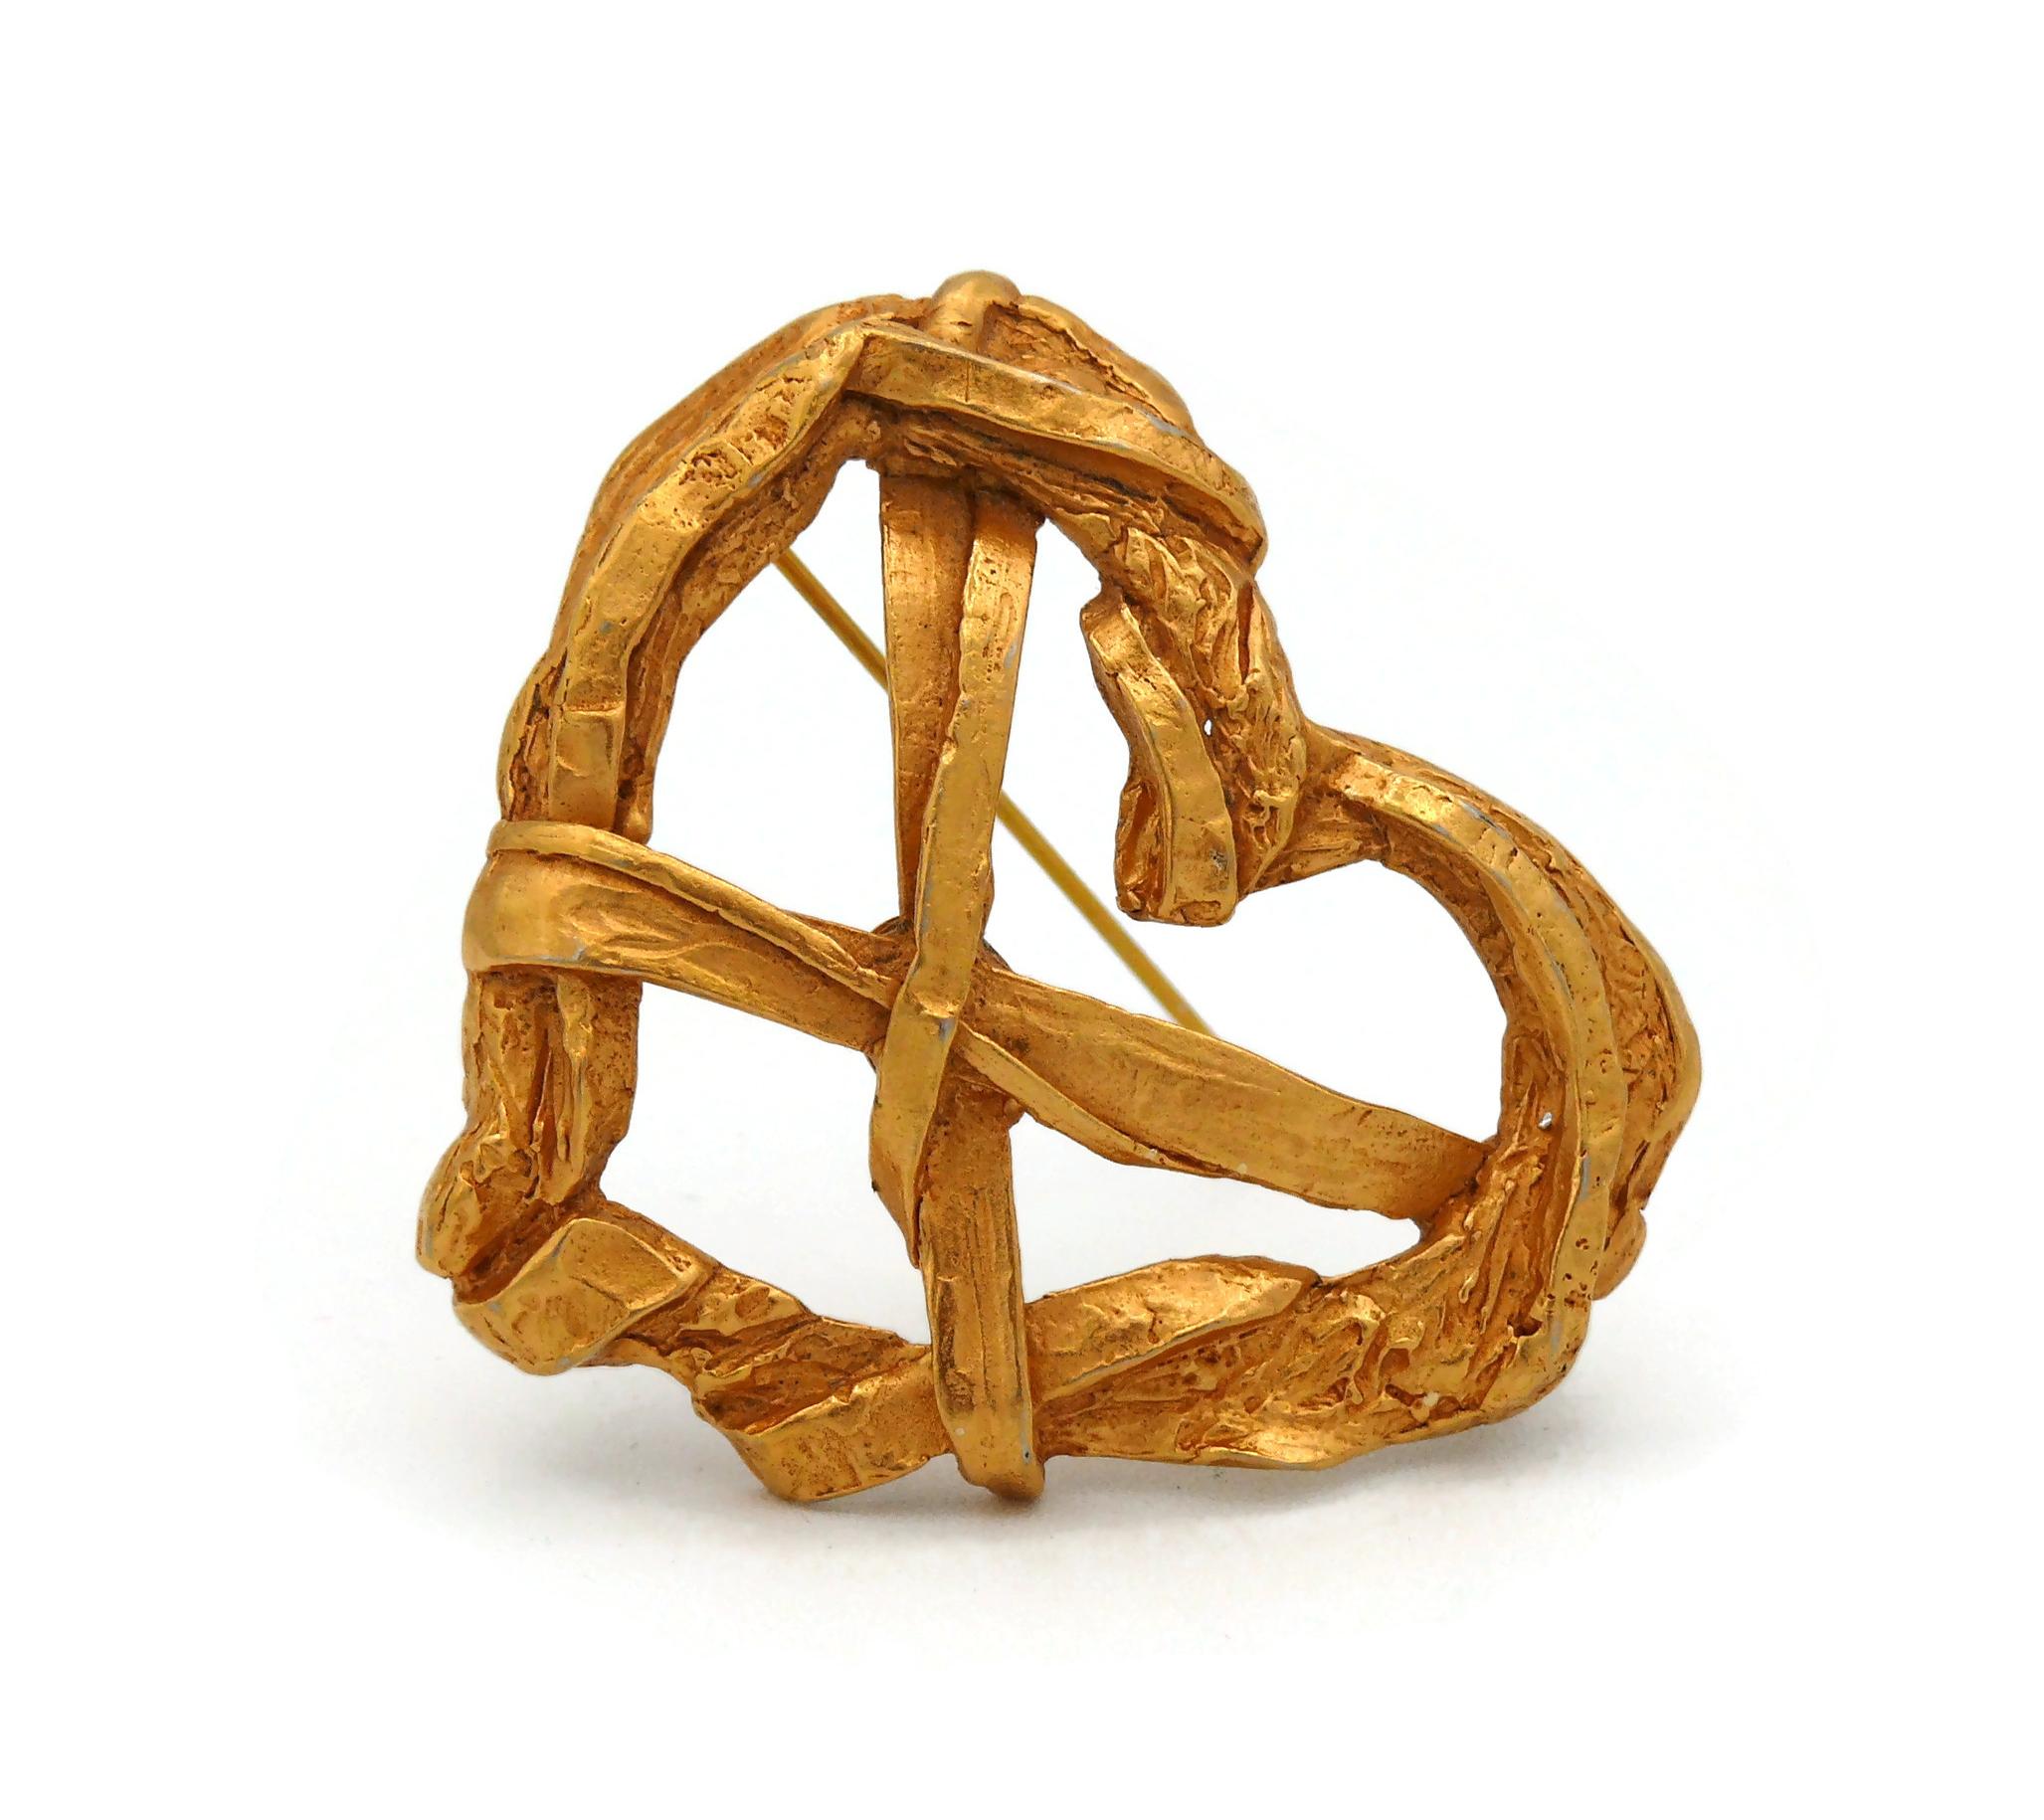 CHRISTIAN LACROIX vintage textured gold tone heart brooch featuring a ribbon design.

Marked CHRISTIAN LACROIX CL Made in France.

Indicative measurements : max. height approx. 4.8 cm (1.89 inches) / max. width approx. 5.5 cm (2.17